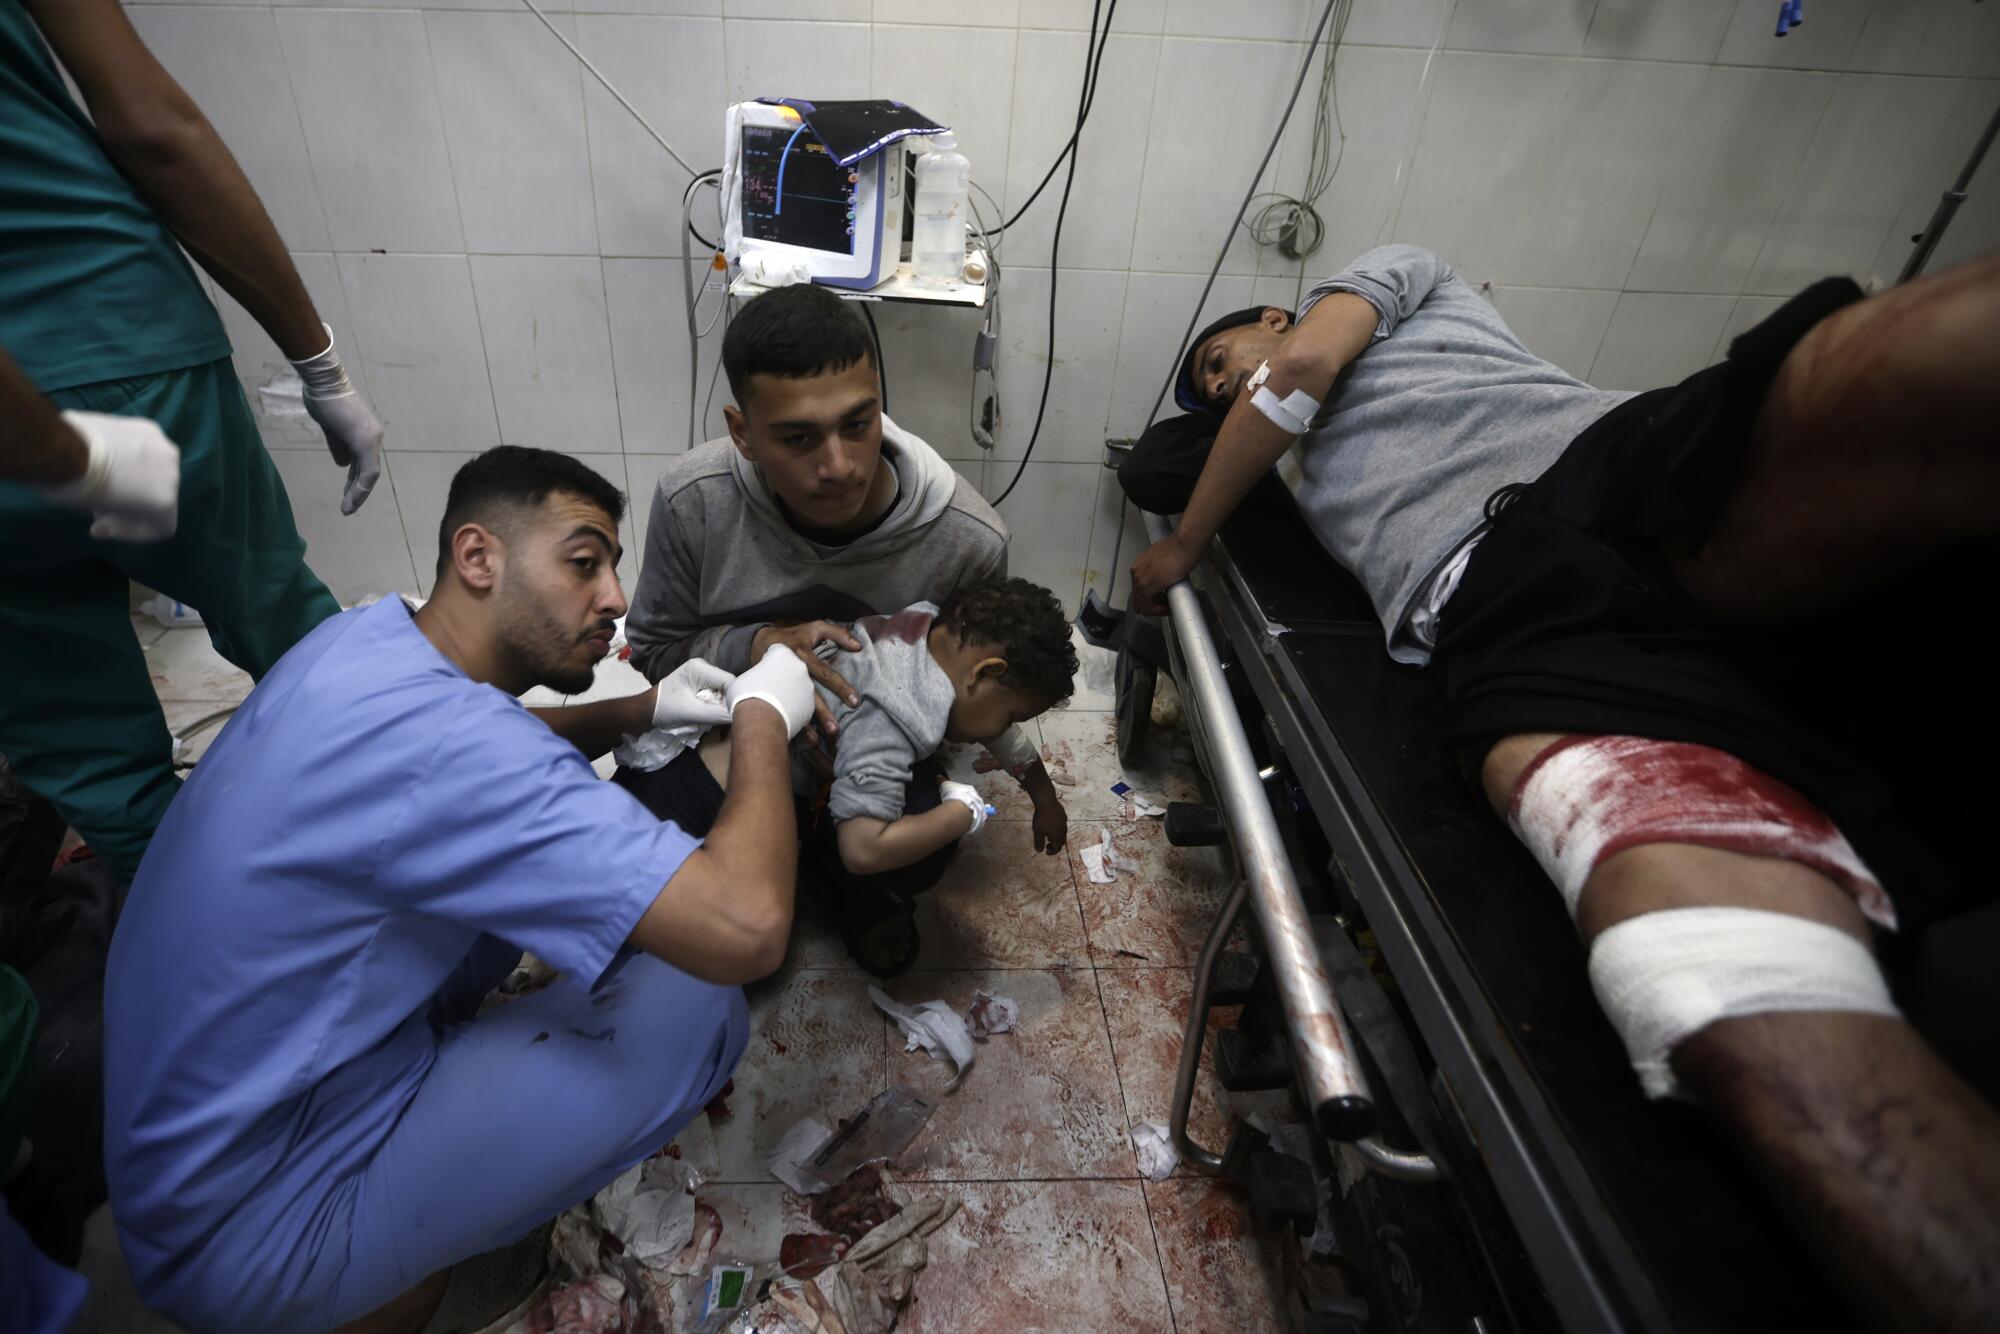 Wounded Gazans at a hospital in Khan Yunis